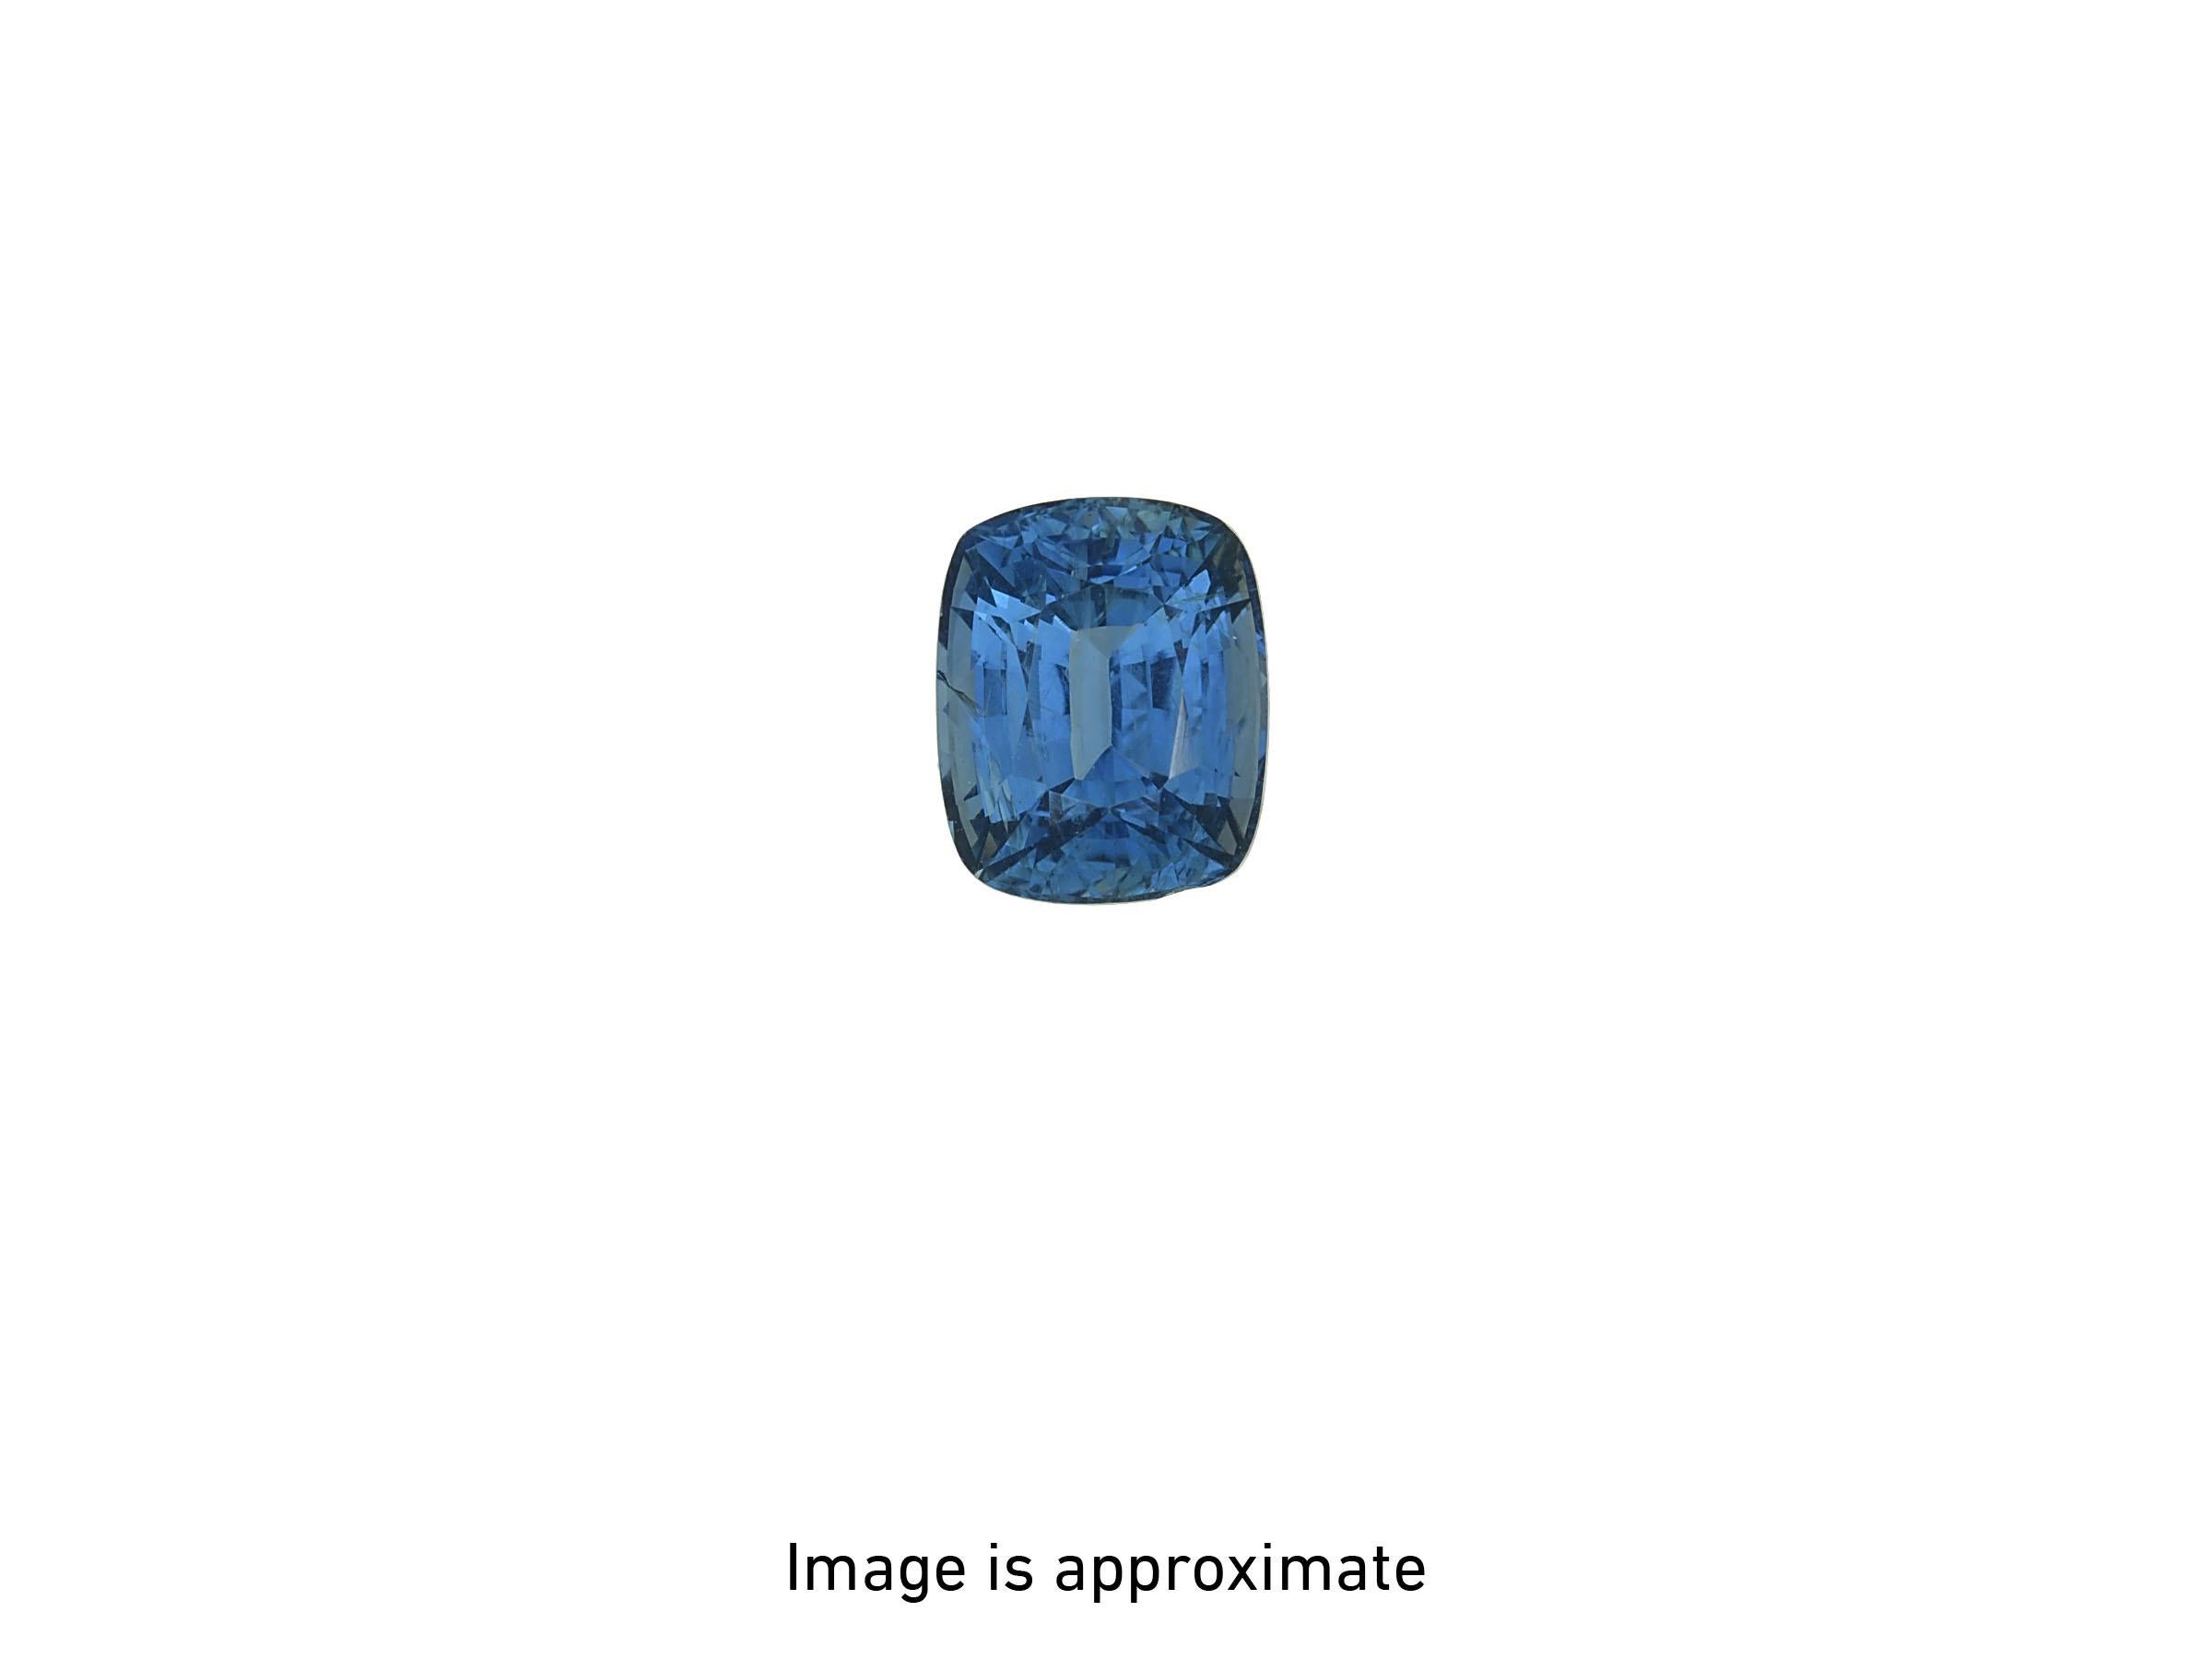 Women's 4.61ct untreated cushion-cut, blue sapphire ring. GIA certified. For Sale